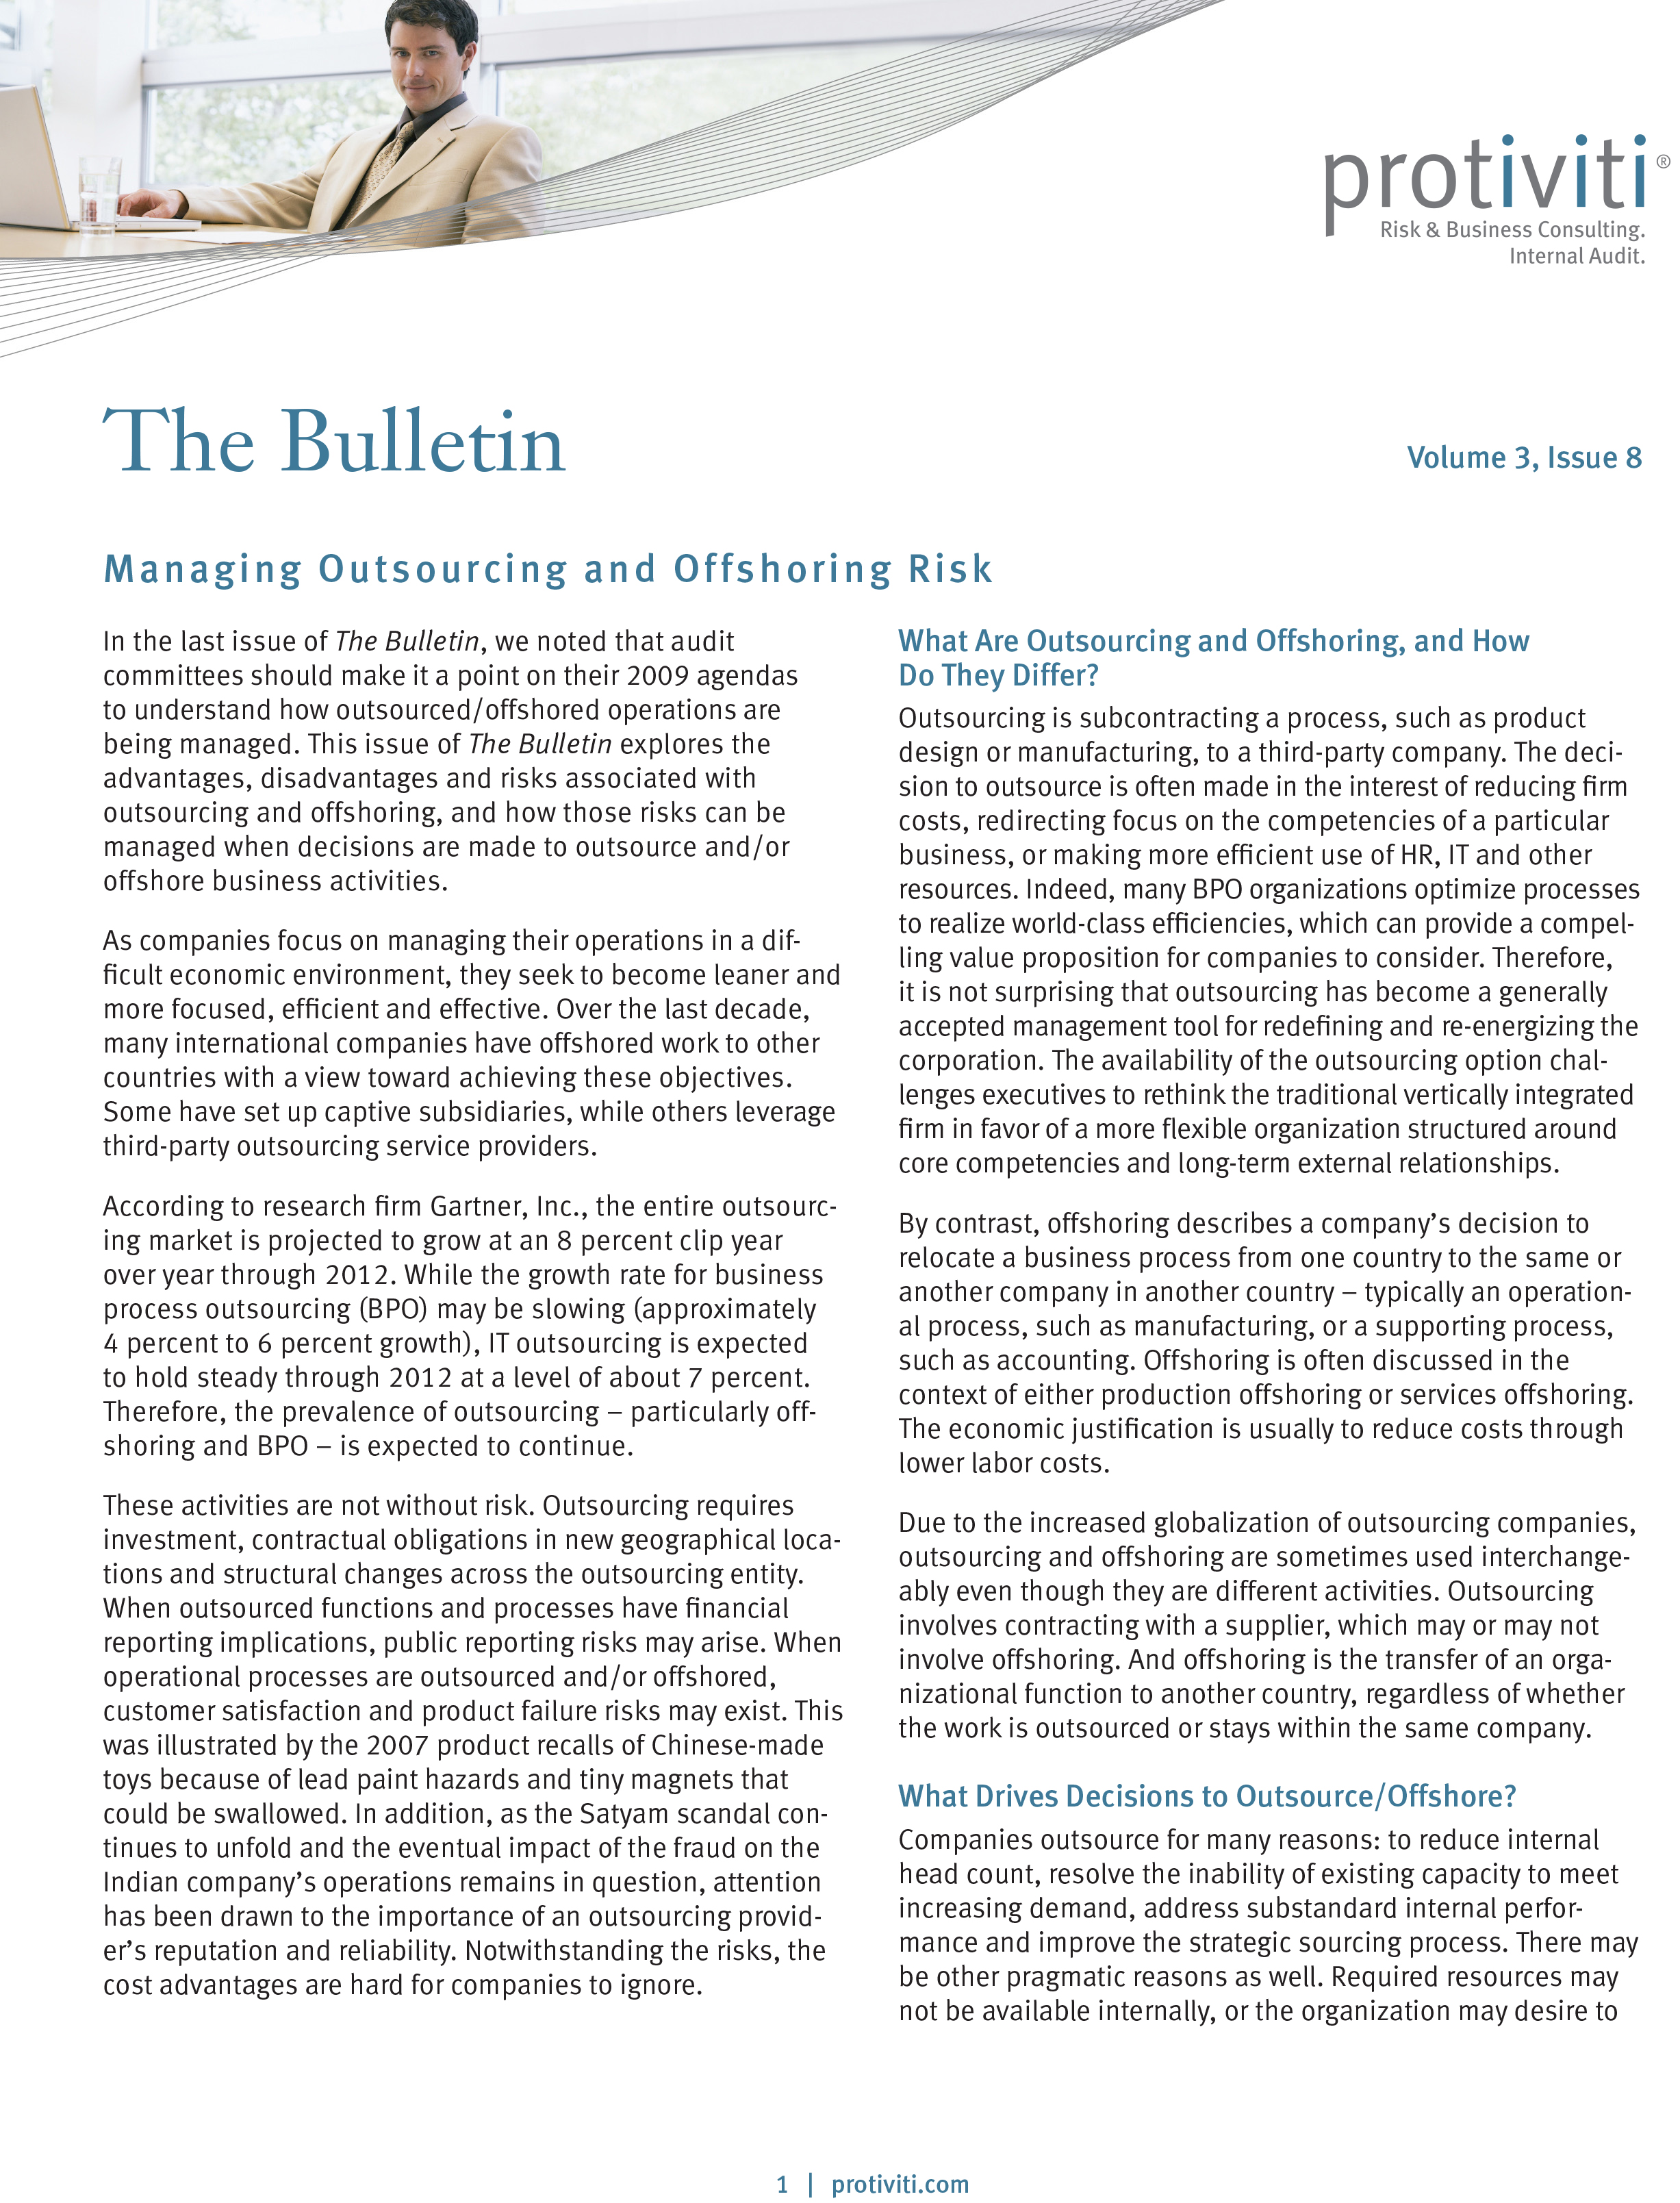 Screenshot of the first page of Managing Outsourcing and Offshoring Risk